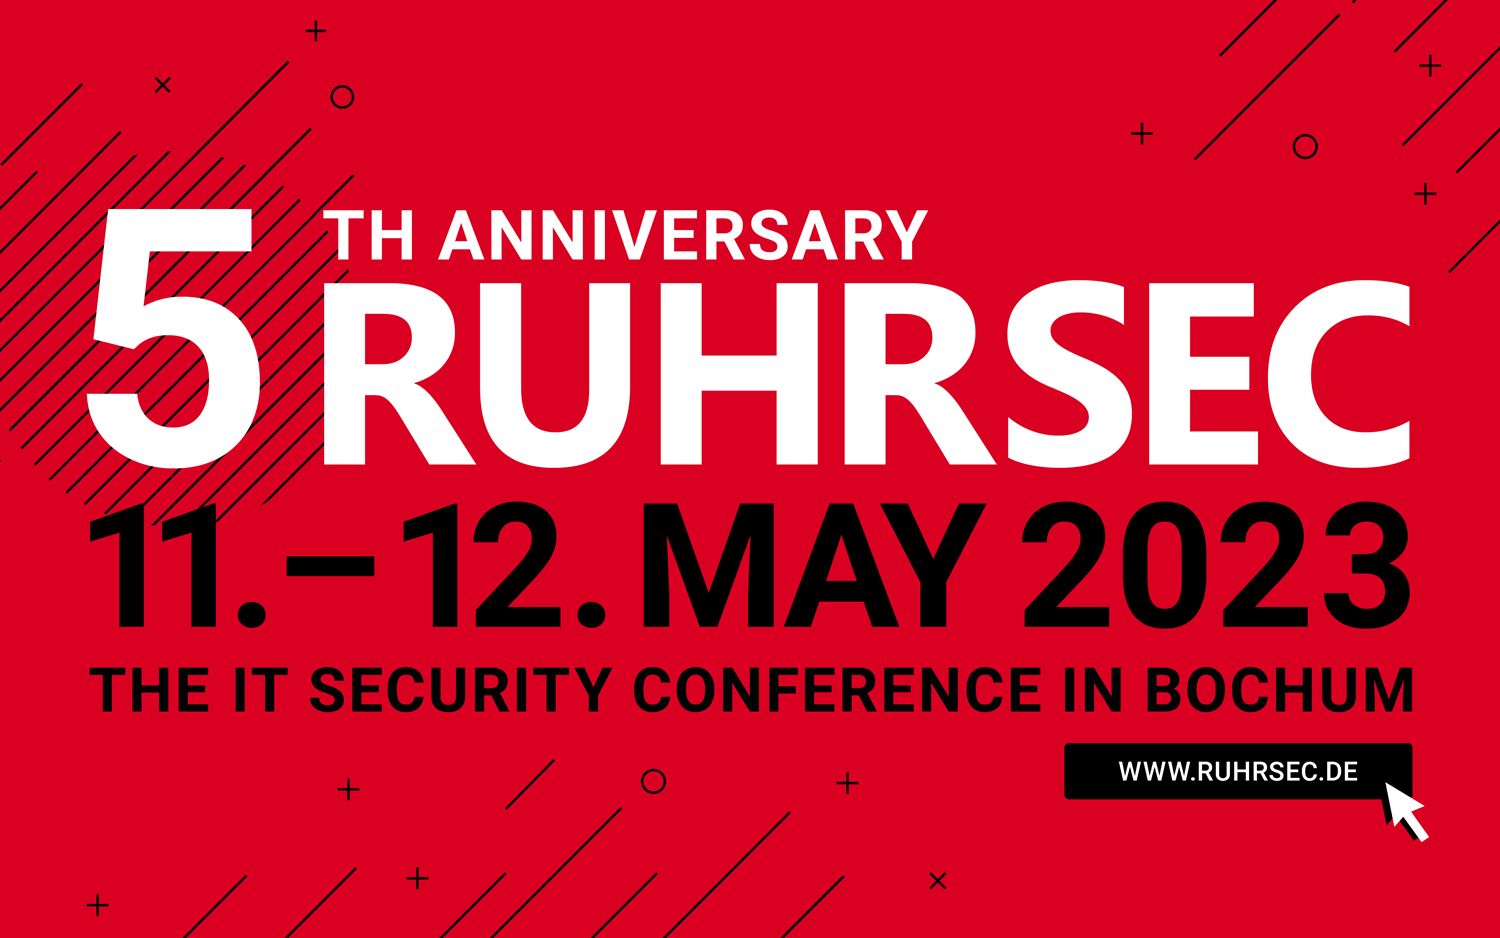 RuhrSec - IT Security Conference 2023